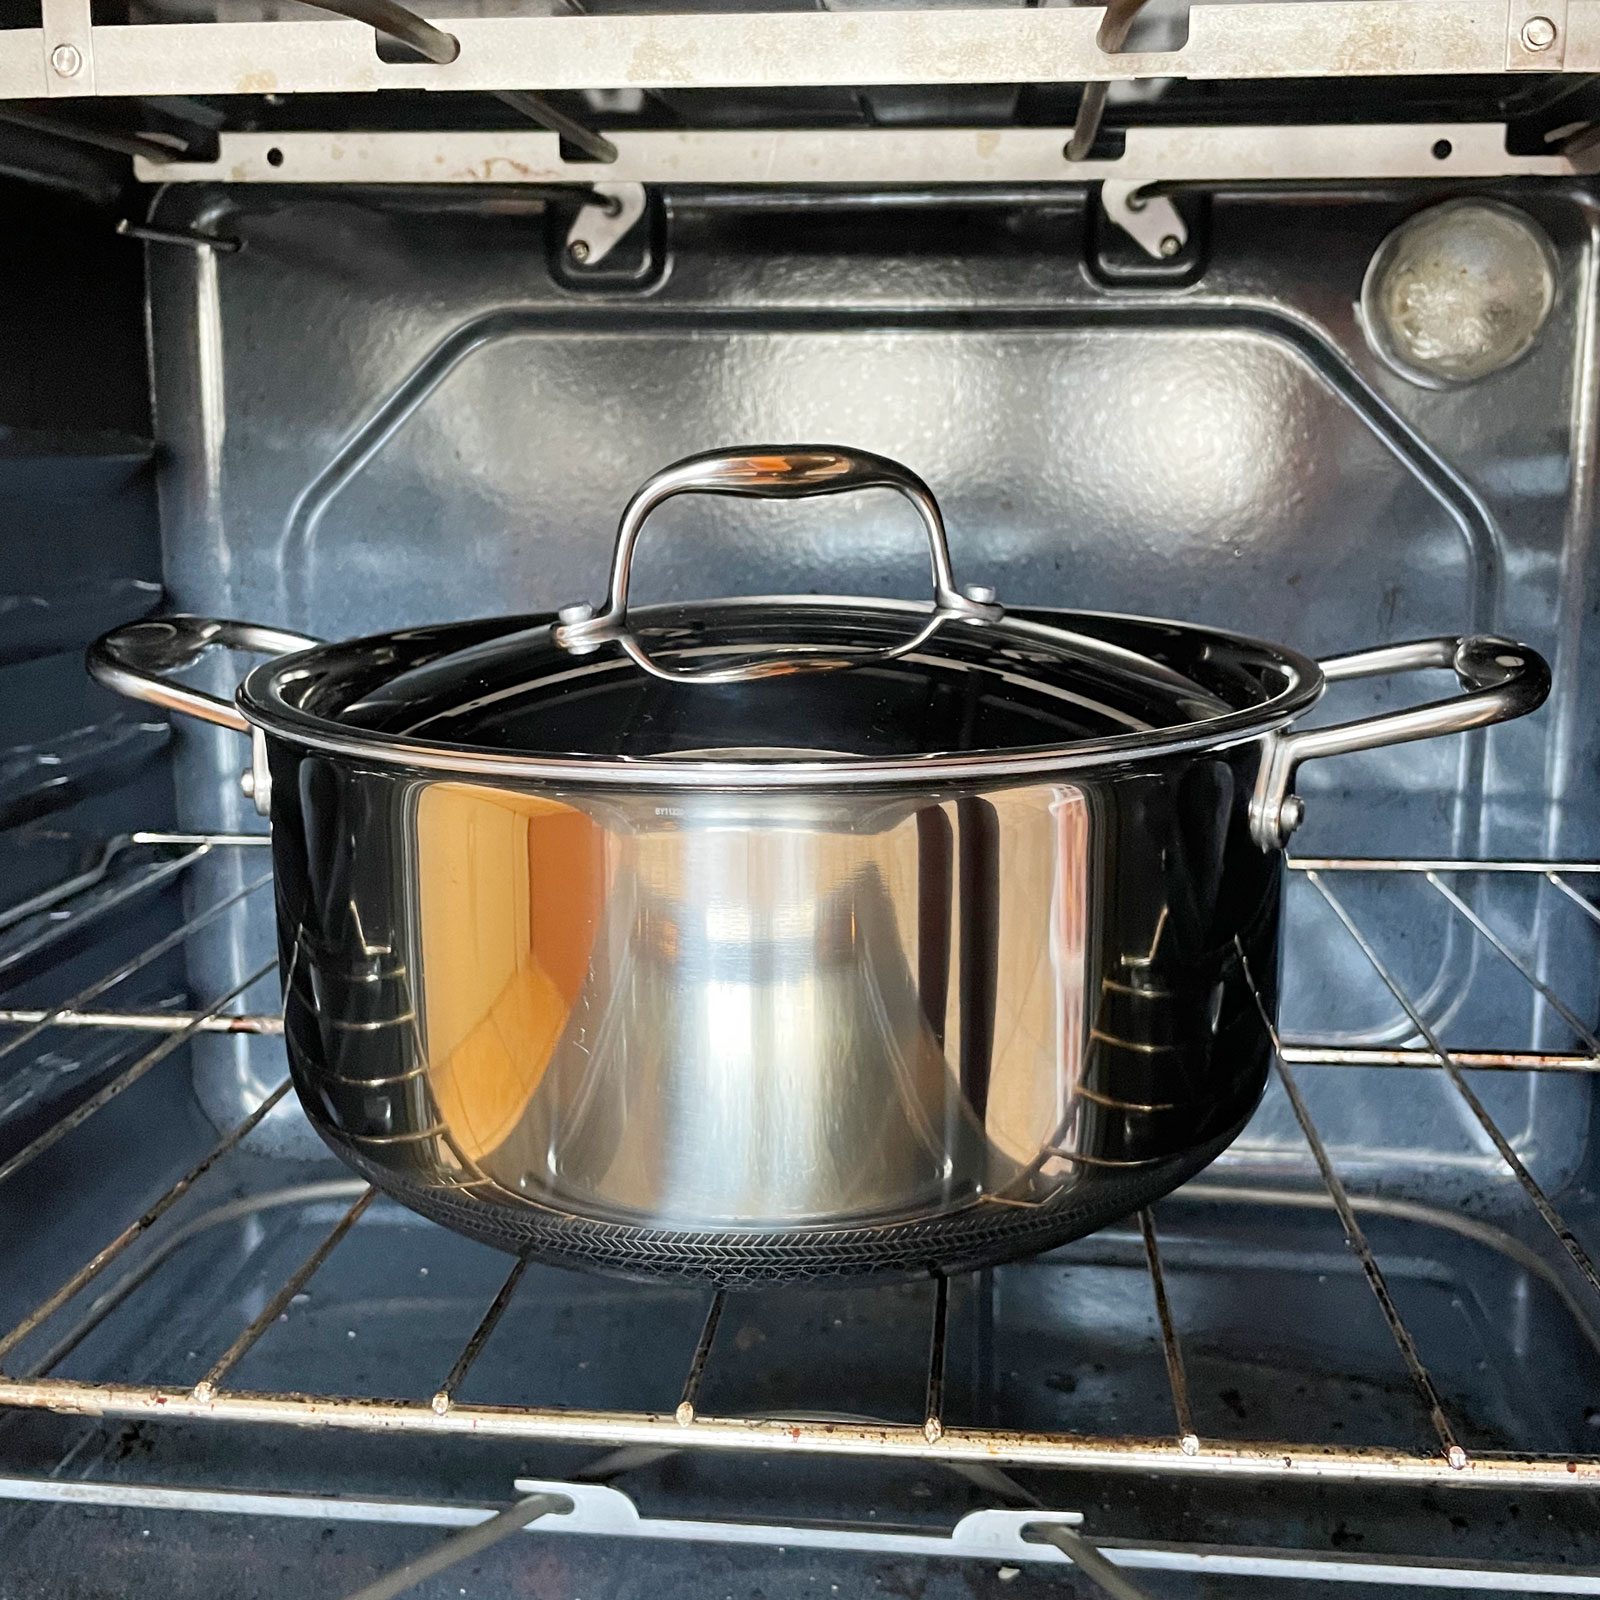 HexClad Cookware Just Launched a New Dutch Oven – SheKnows